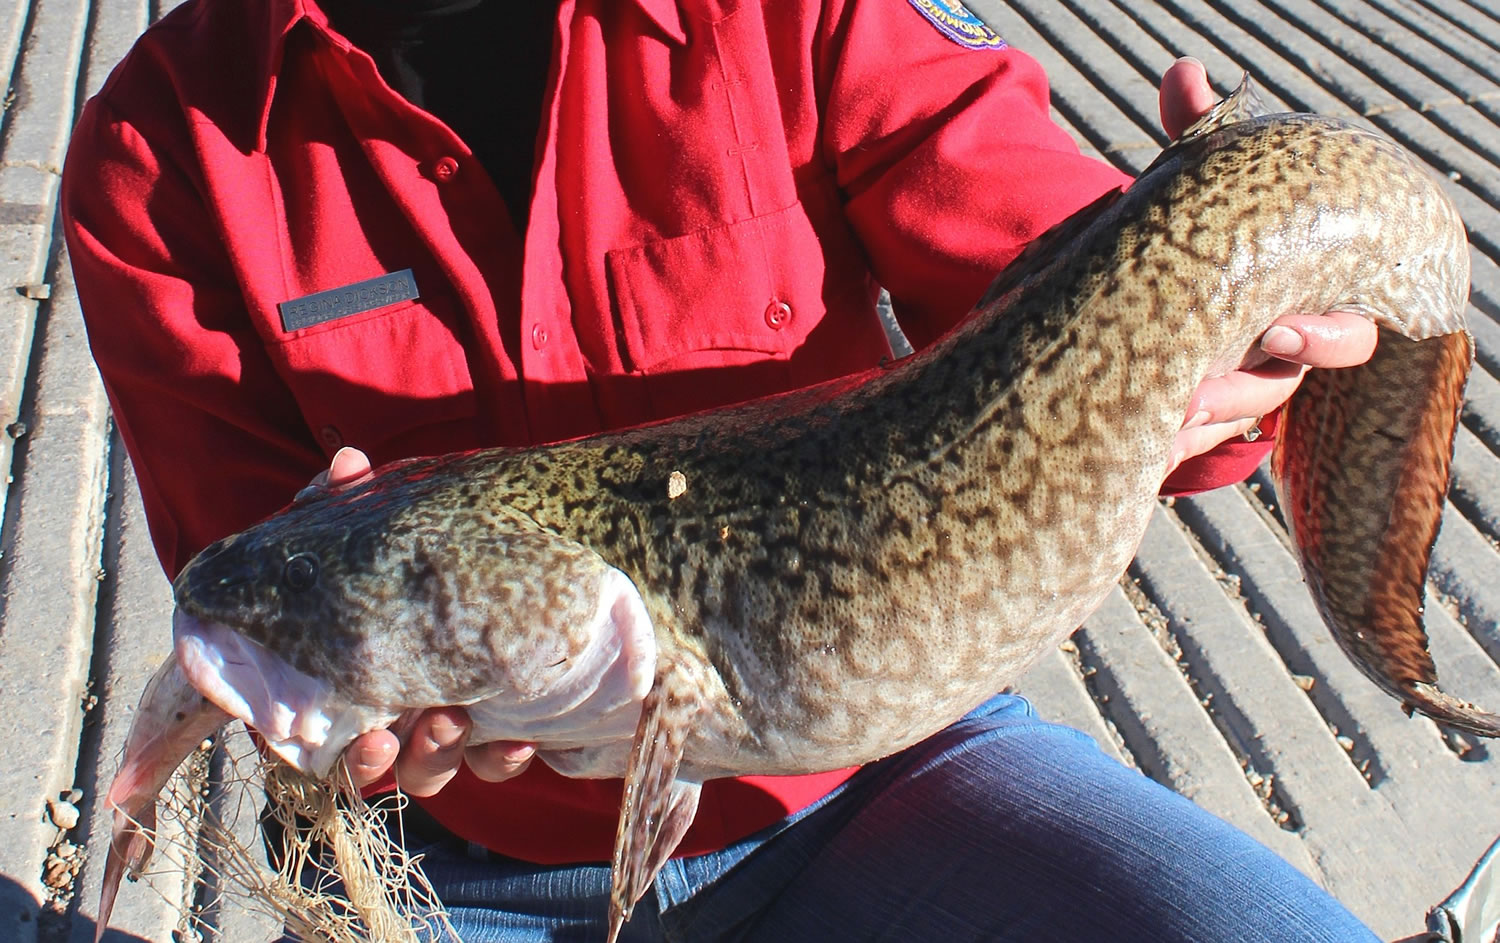 Lack of ice on reservoir gives an ugly invasive fish brief